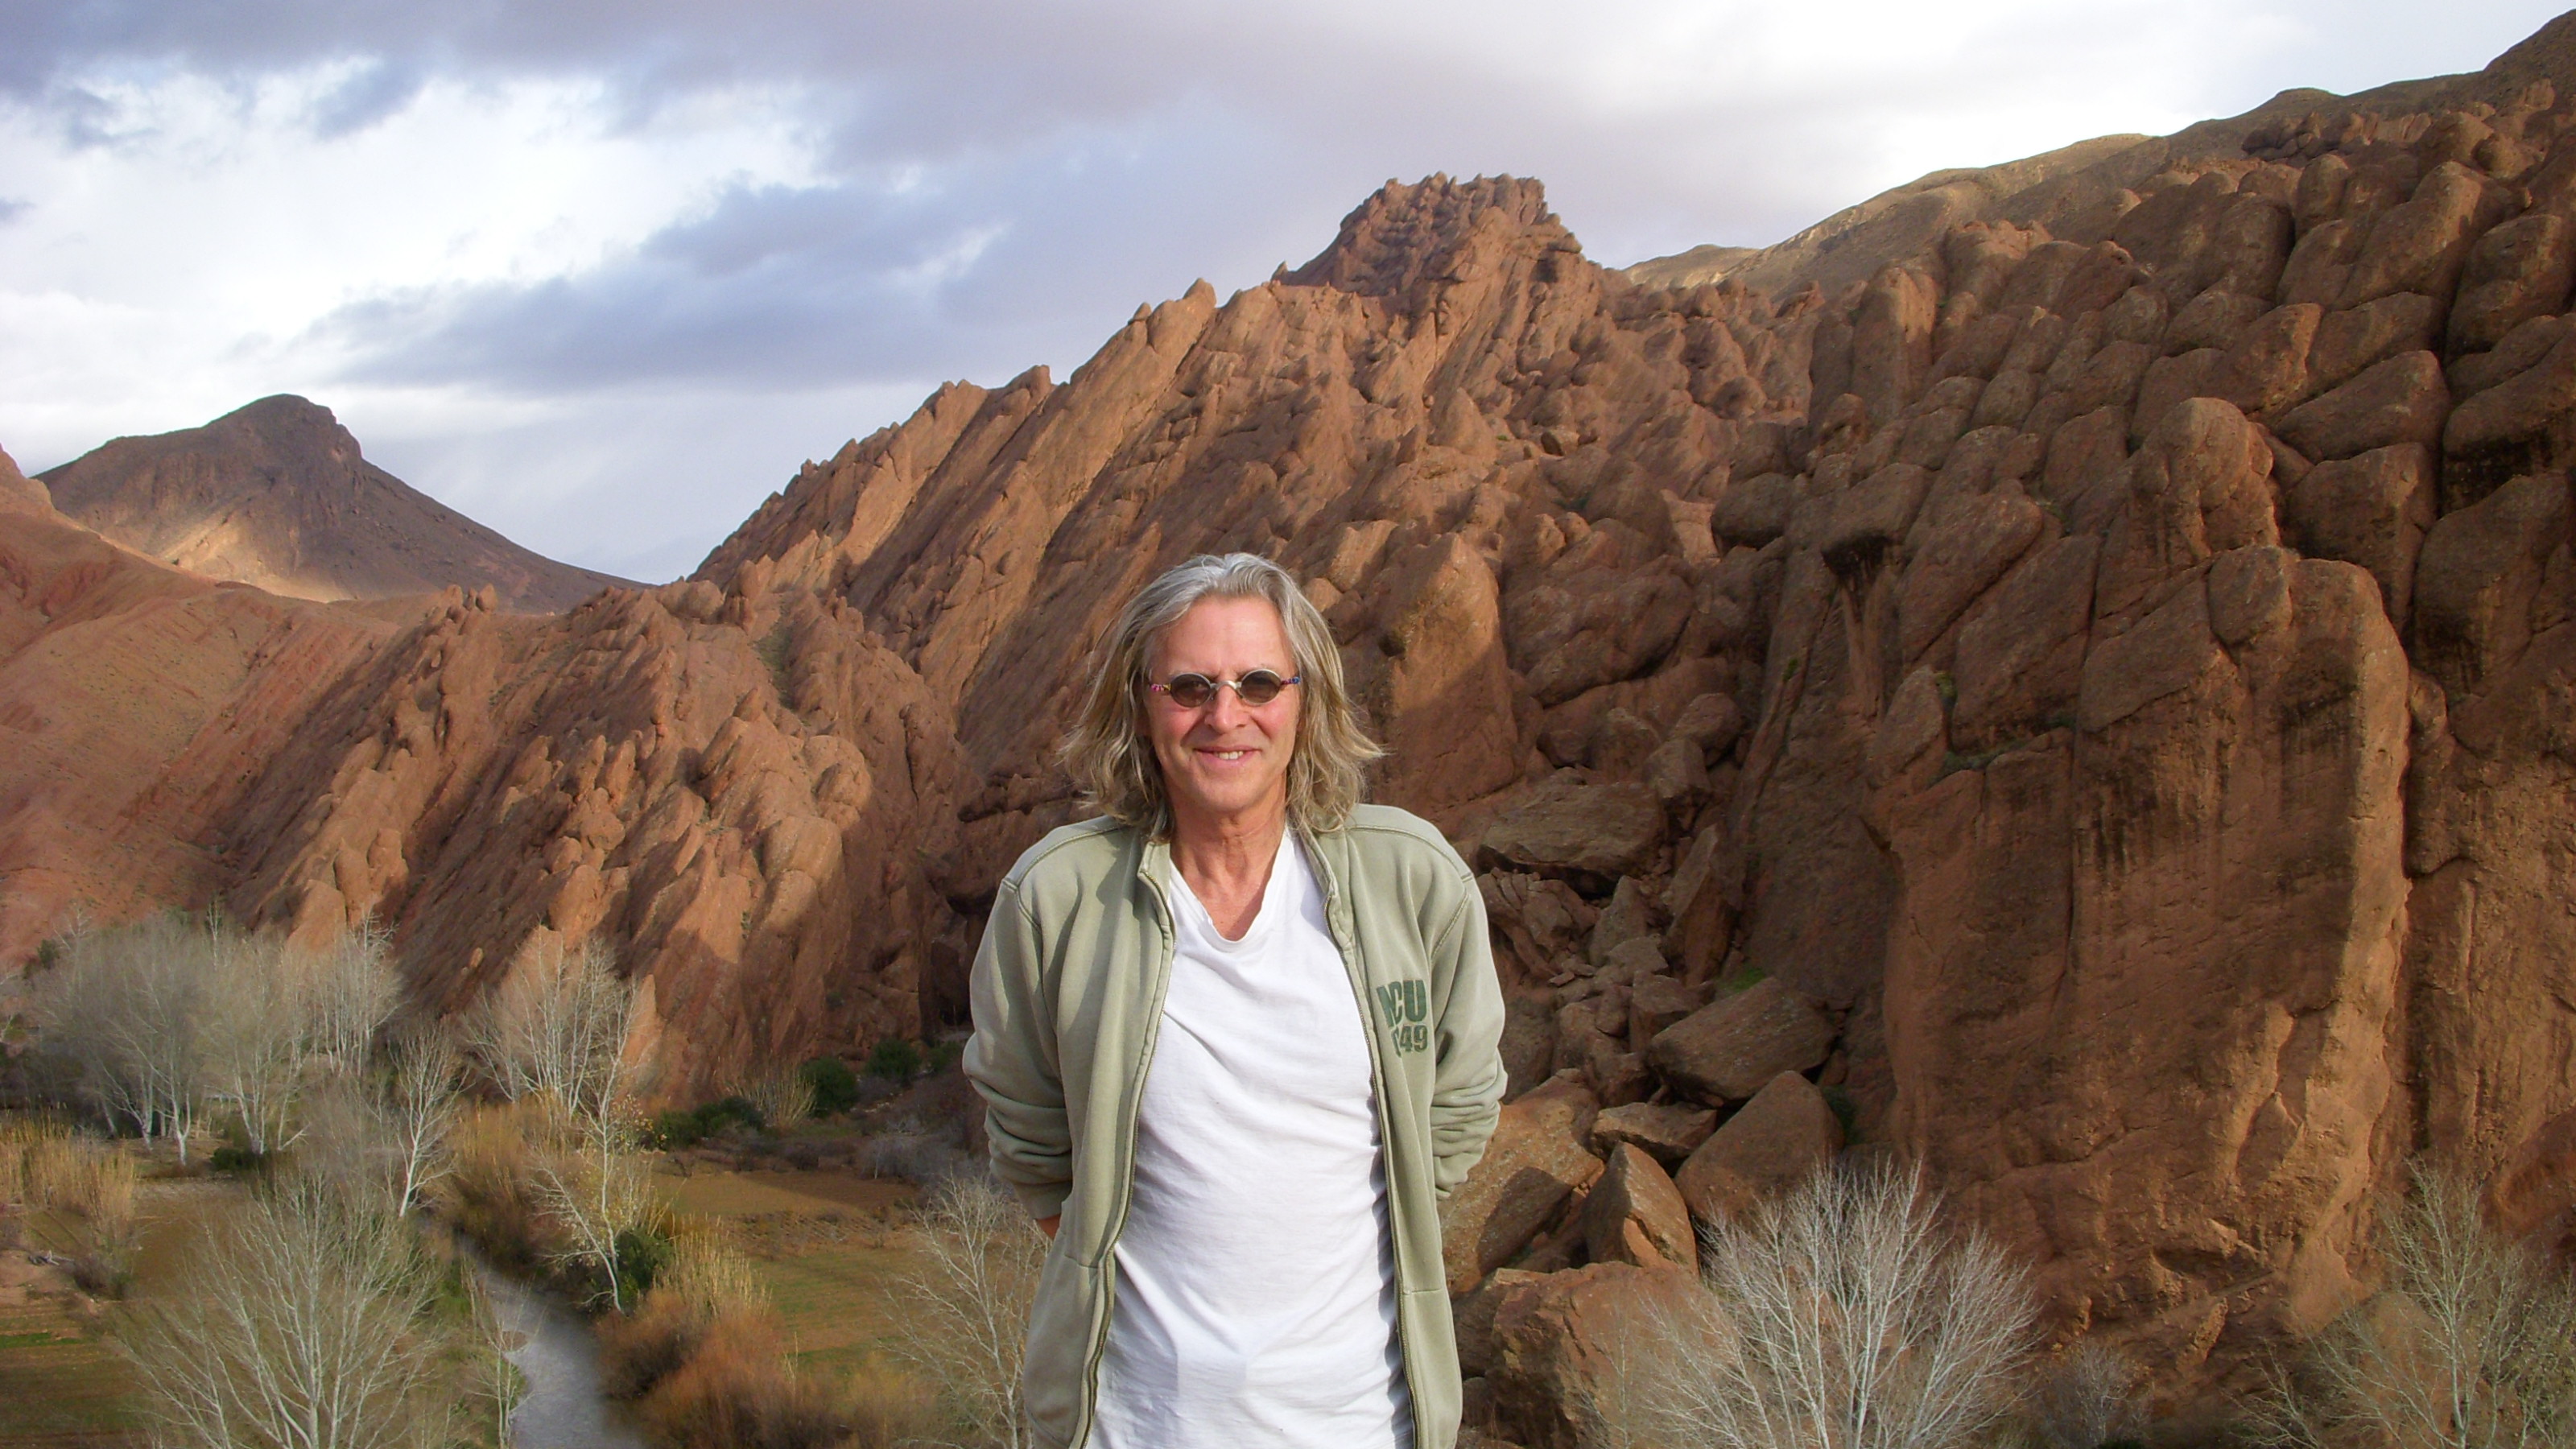 Roger Christian on location in Morocco